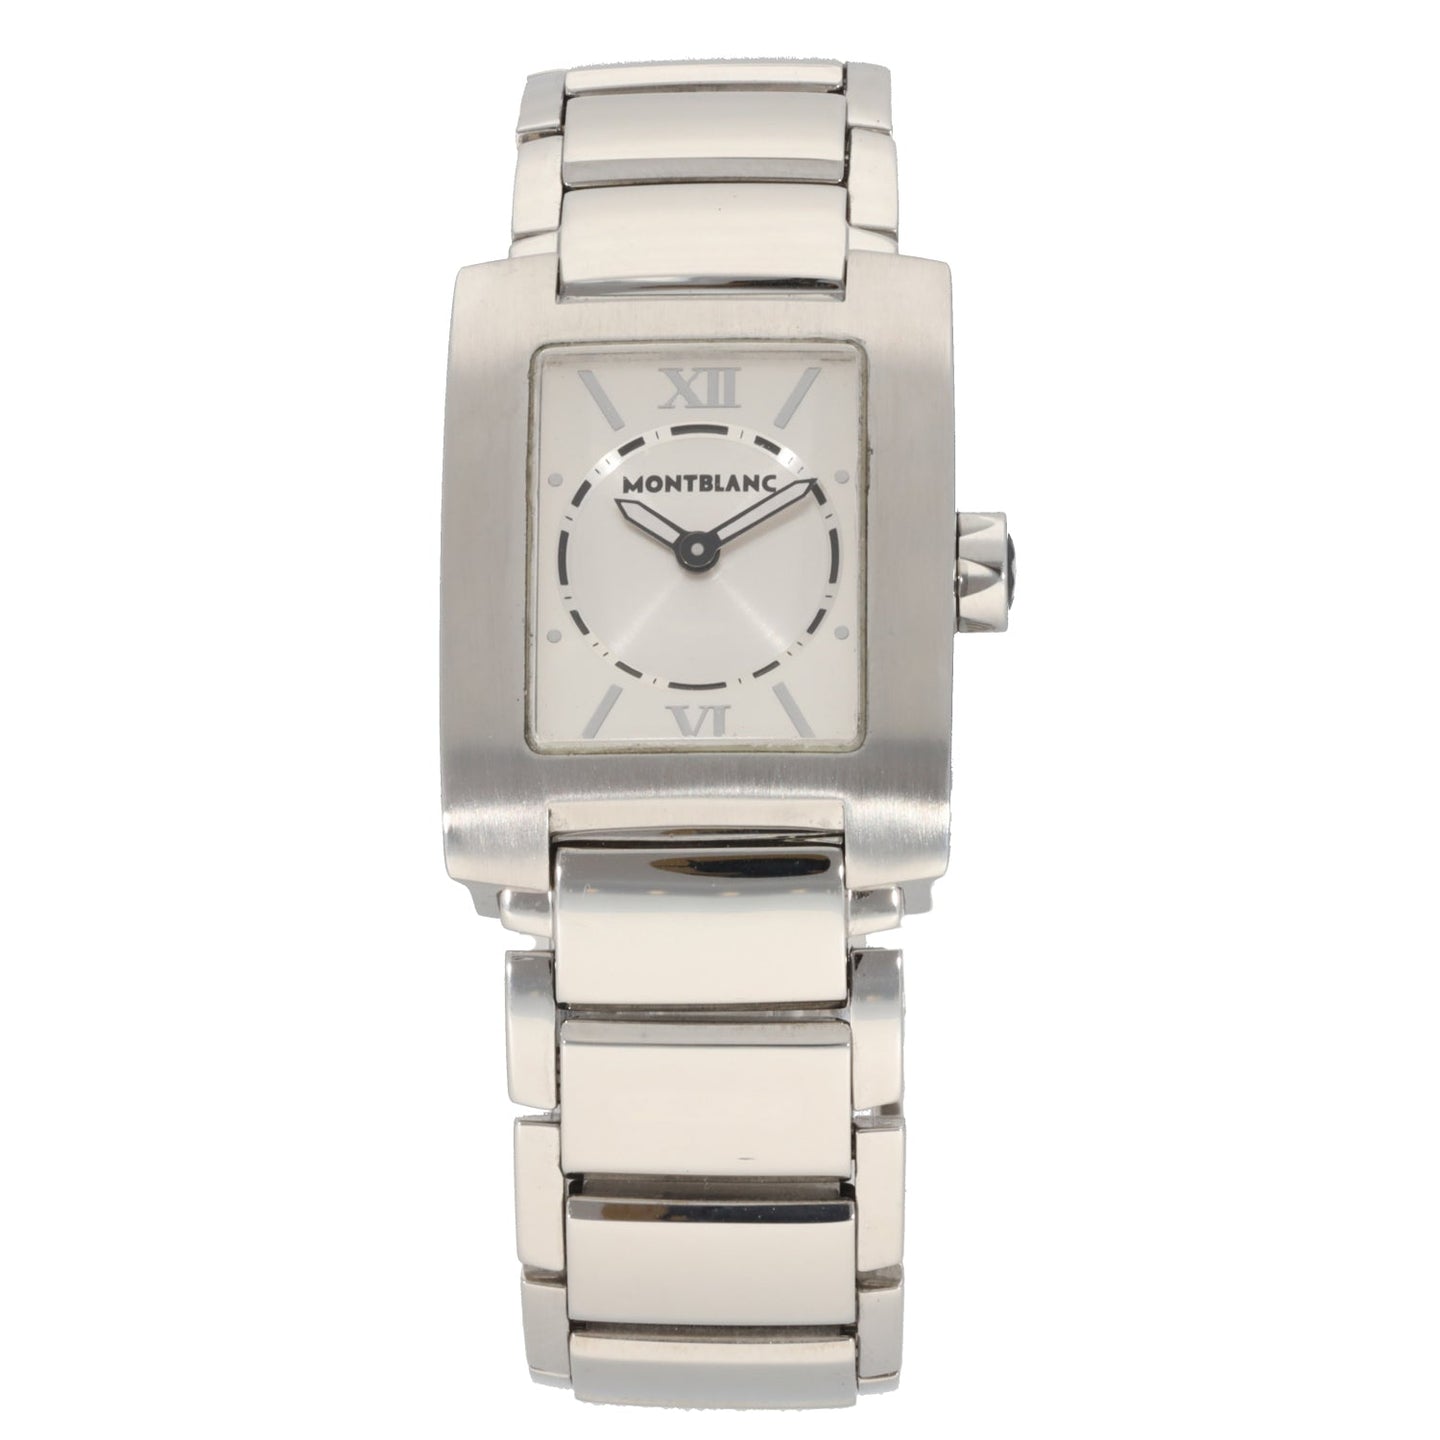 Montblanc Profile 7047 23mm Stainless Steel Watch